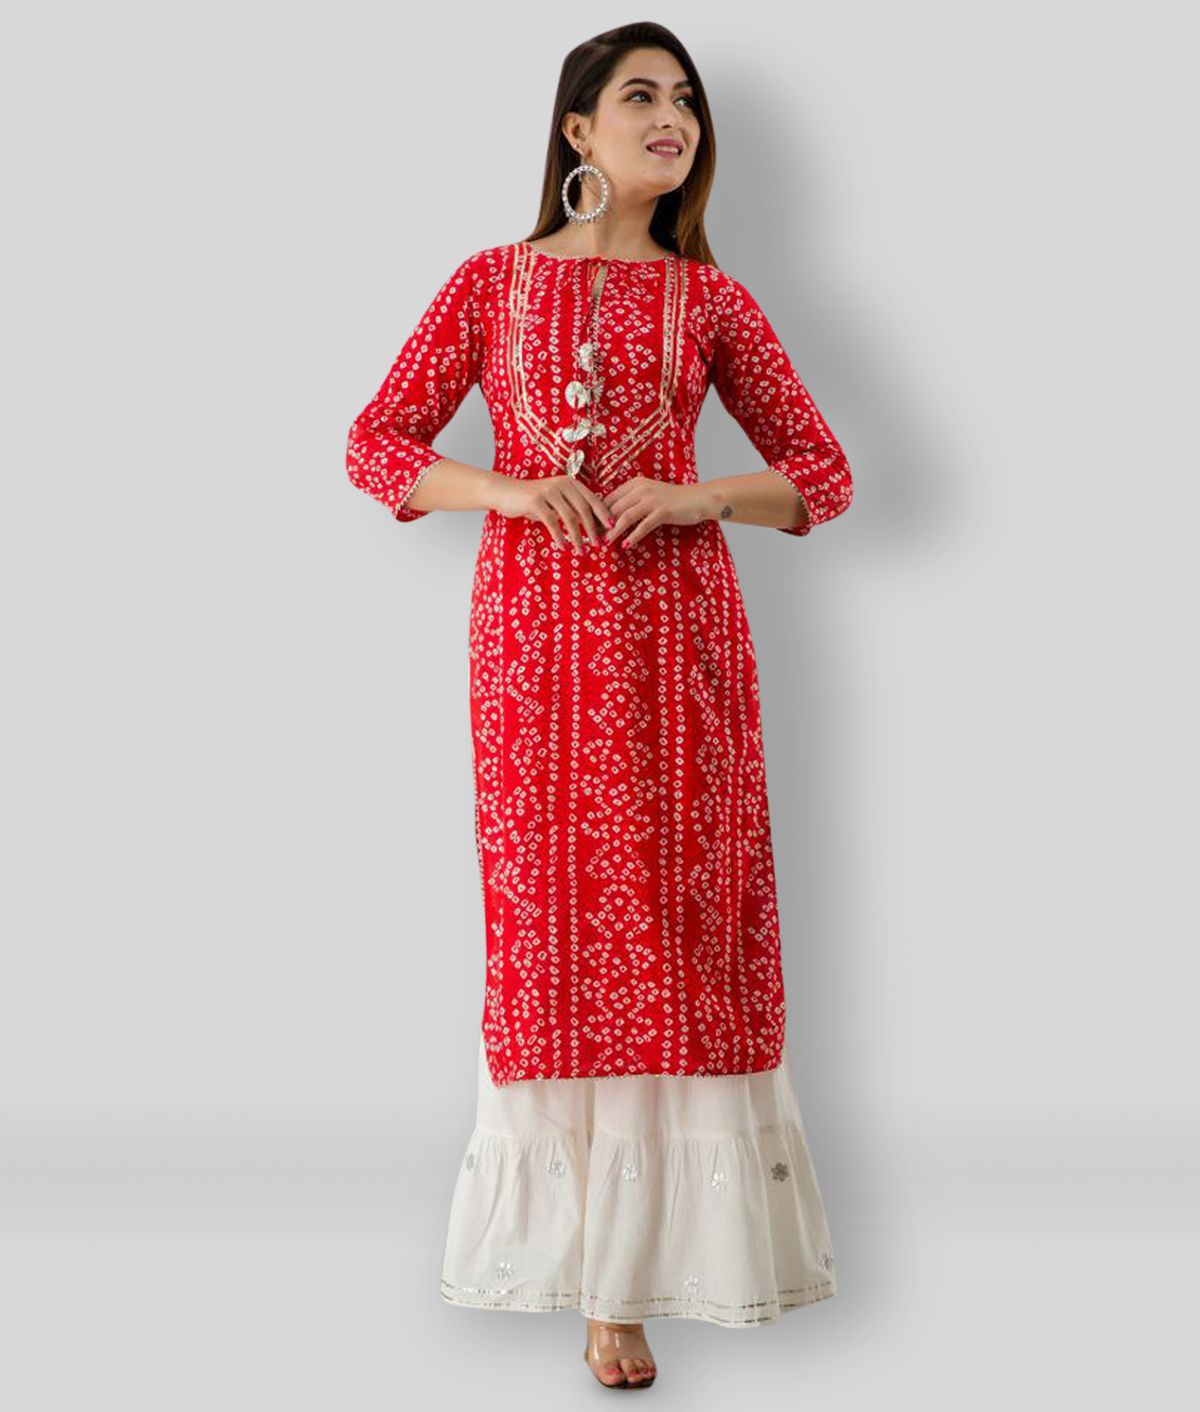     			SVARCHI - Red Straight Cotton Blend Women's Stitched Salwar Suit ( Pack of 1 )